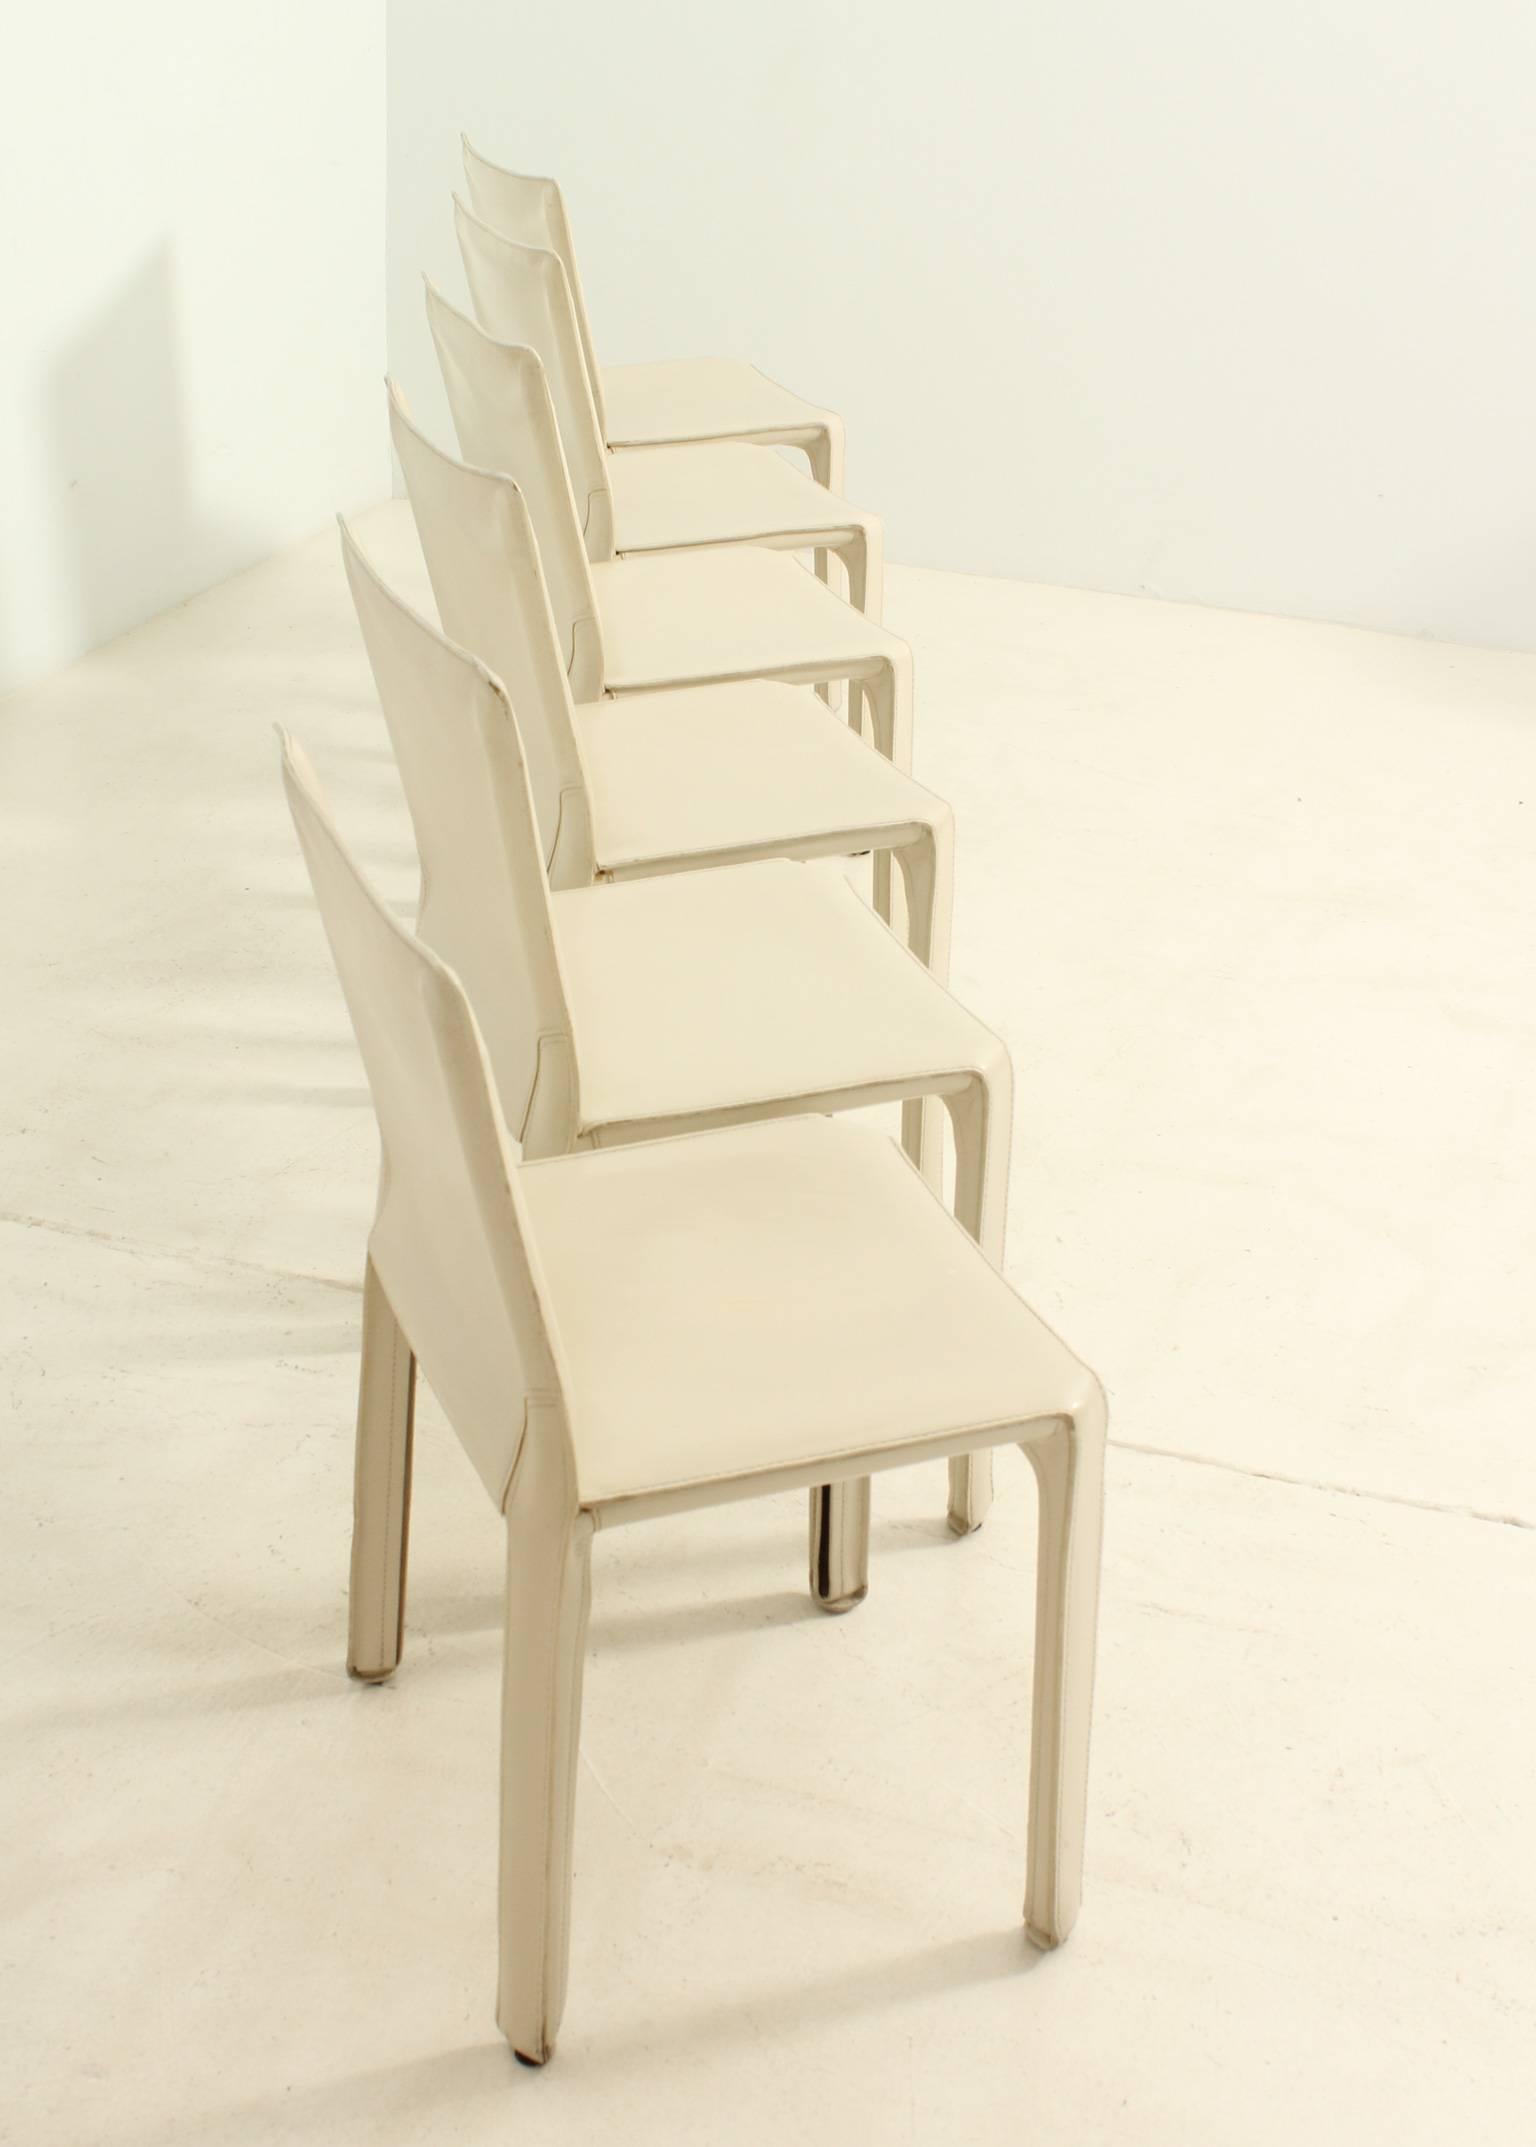 Set of six Cab chairs designed in 1977 by Mario Bellini for Cassina, Italy. Steel frame covered with off-white leather.